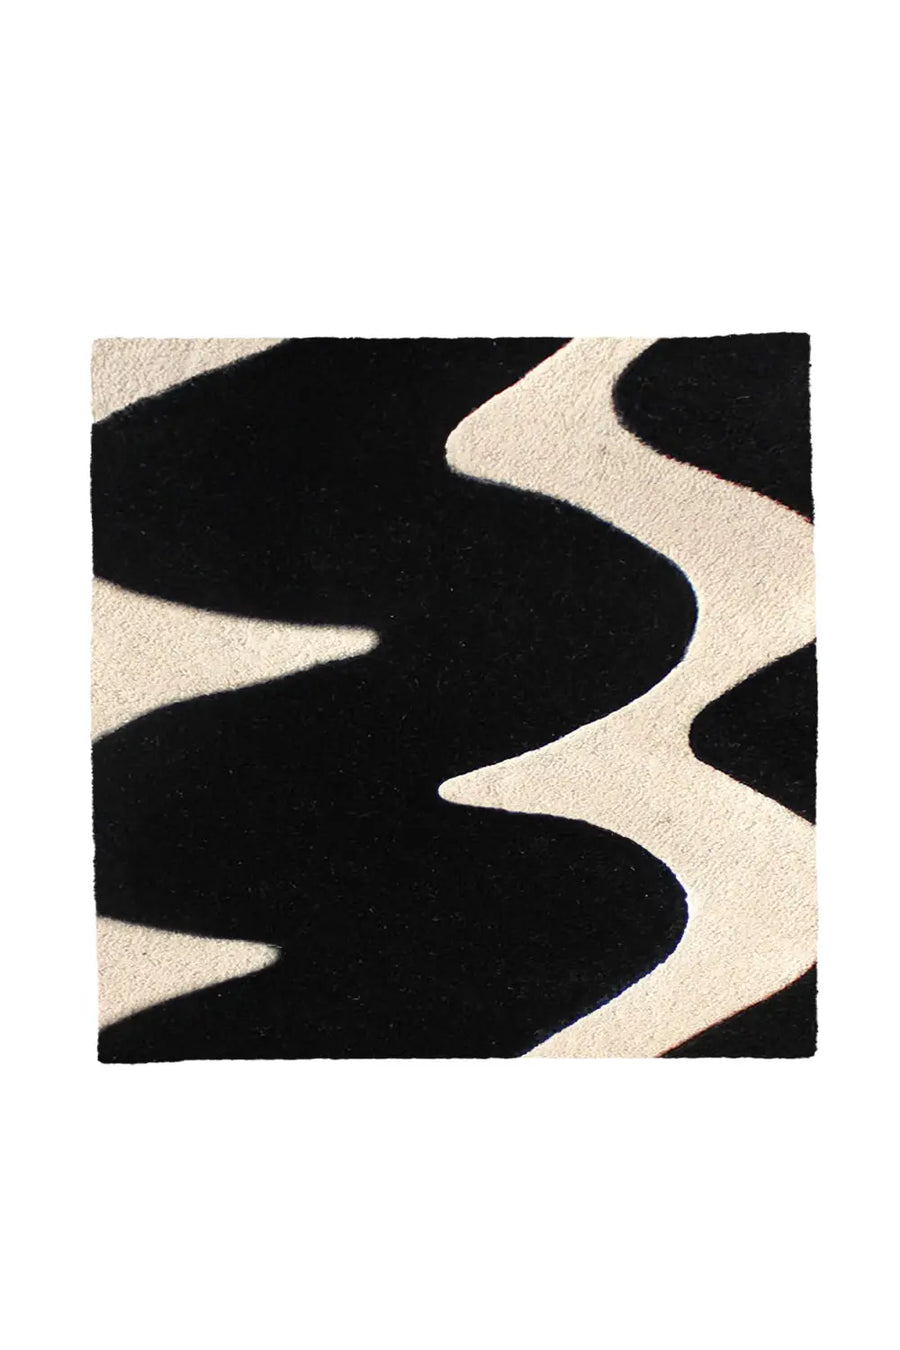 Black and White Zig Zag Square Hand Tufted Wool Rug